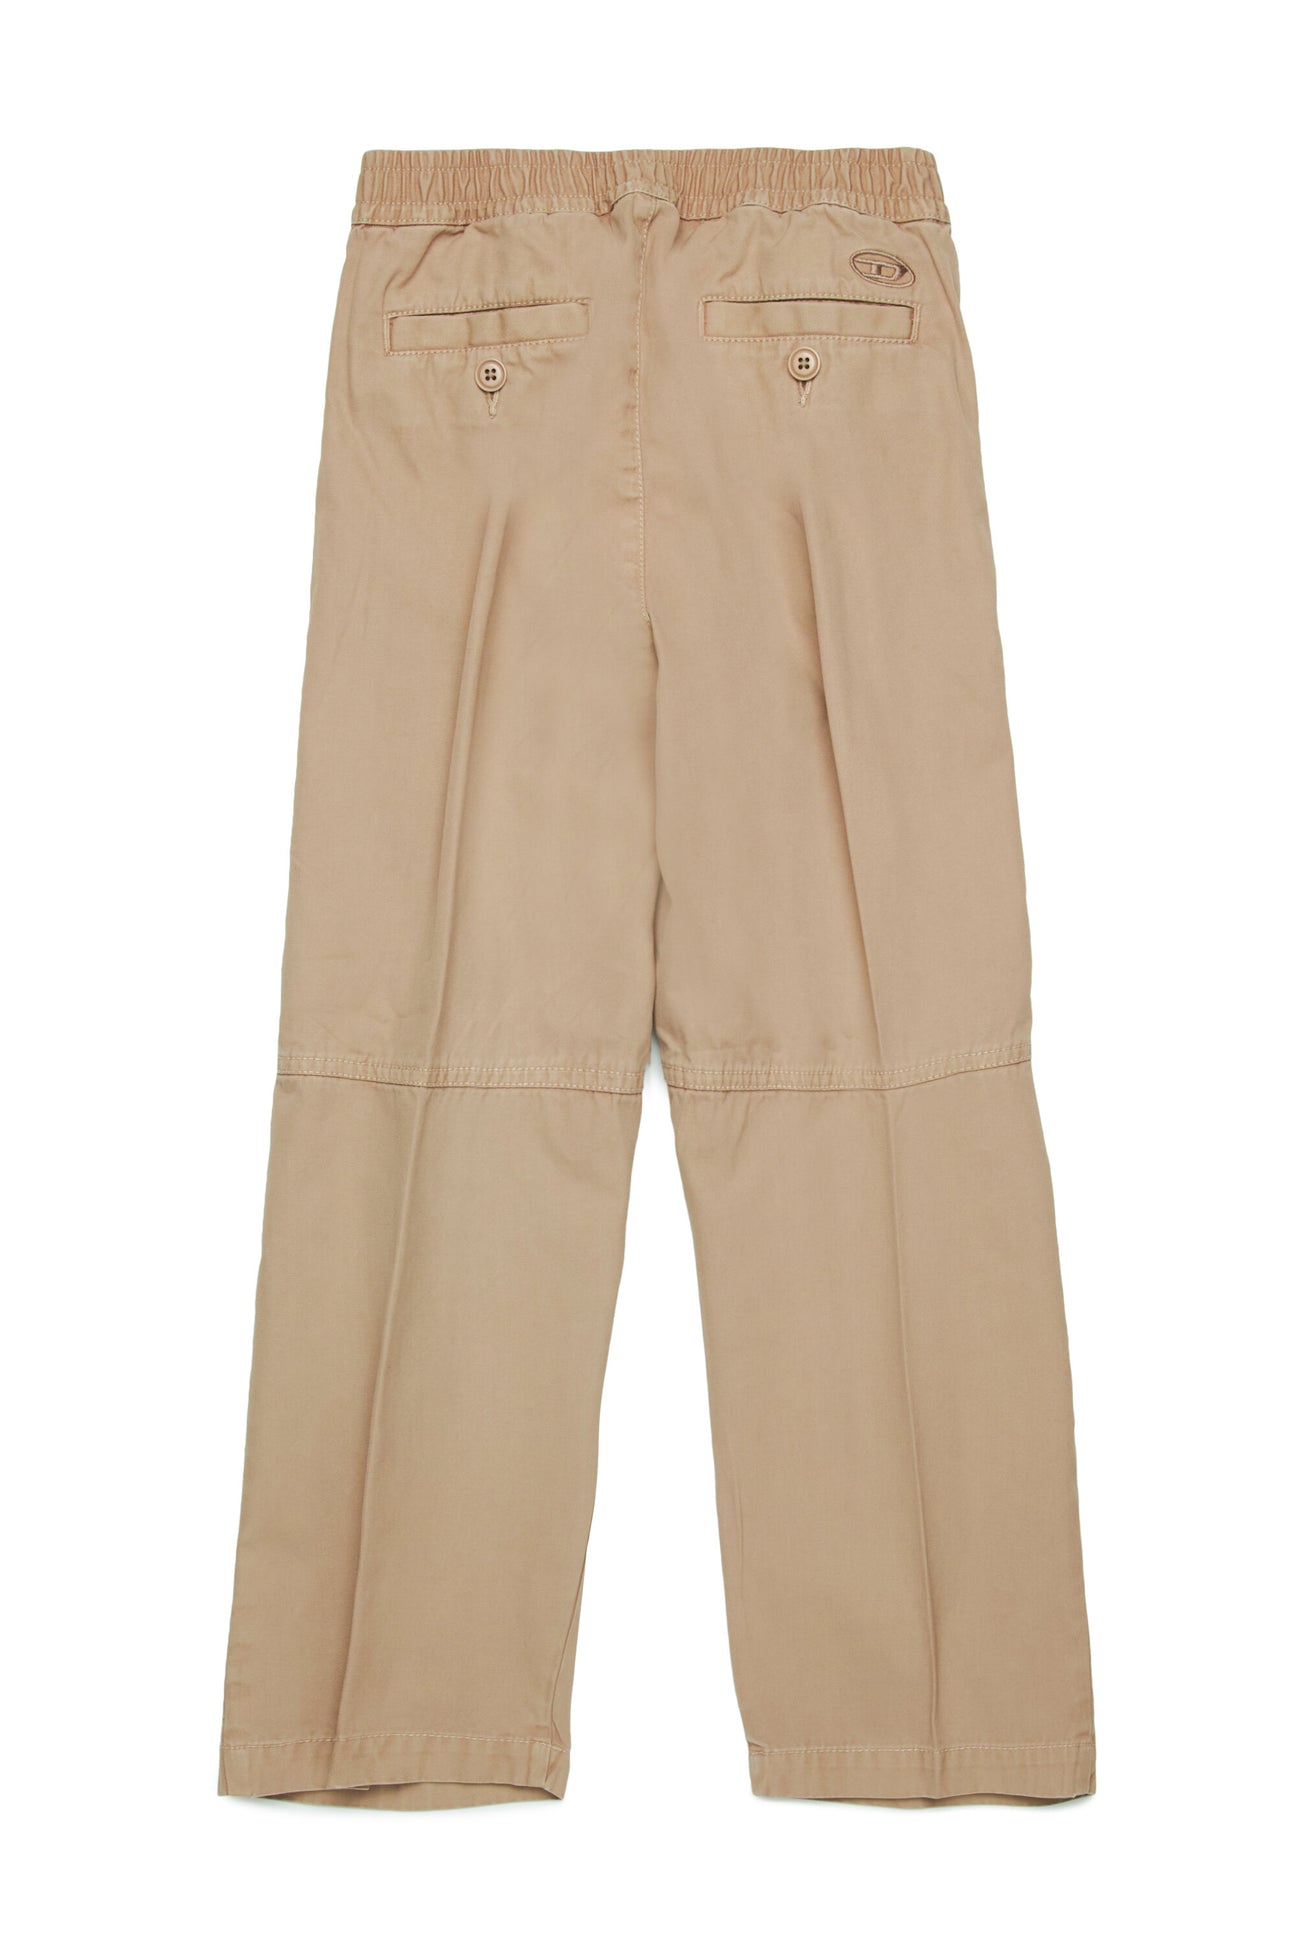 Oval D branded gabardine chino trousers Oval D branded gabardine chino trousers